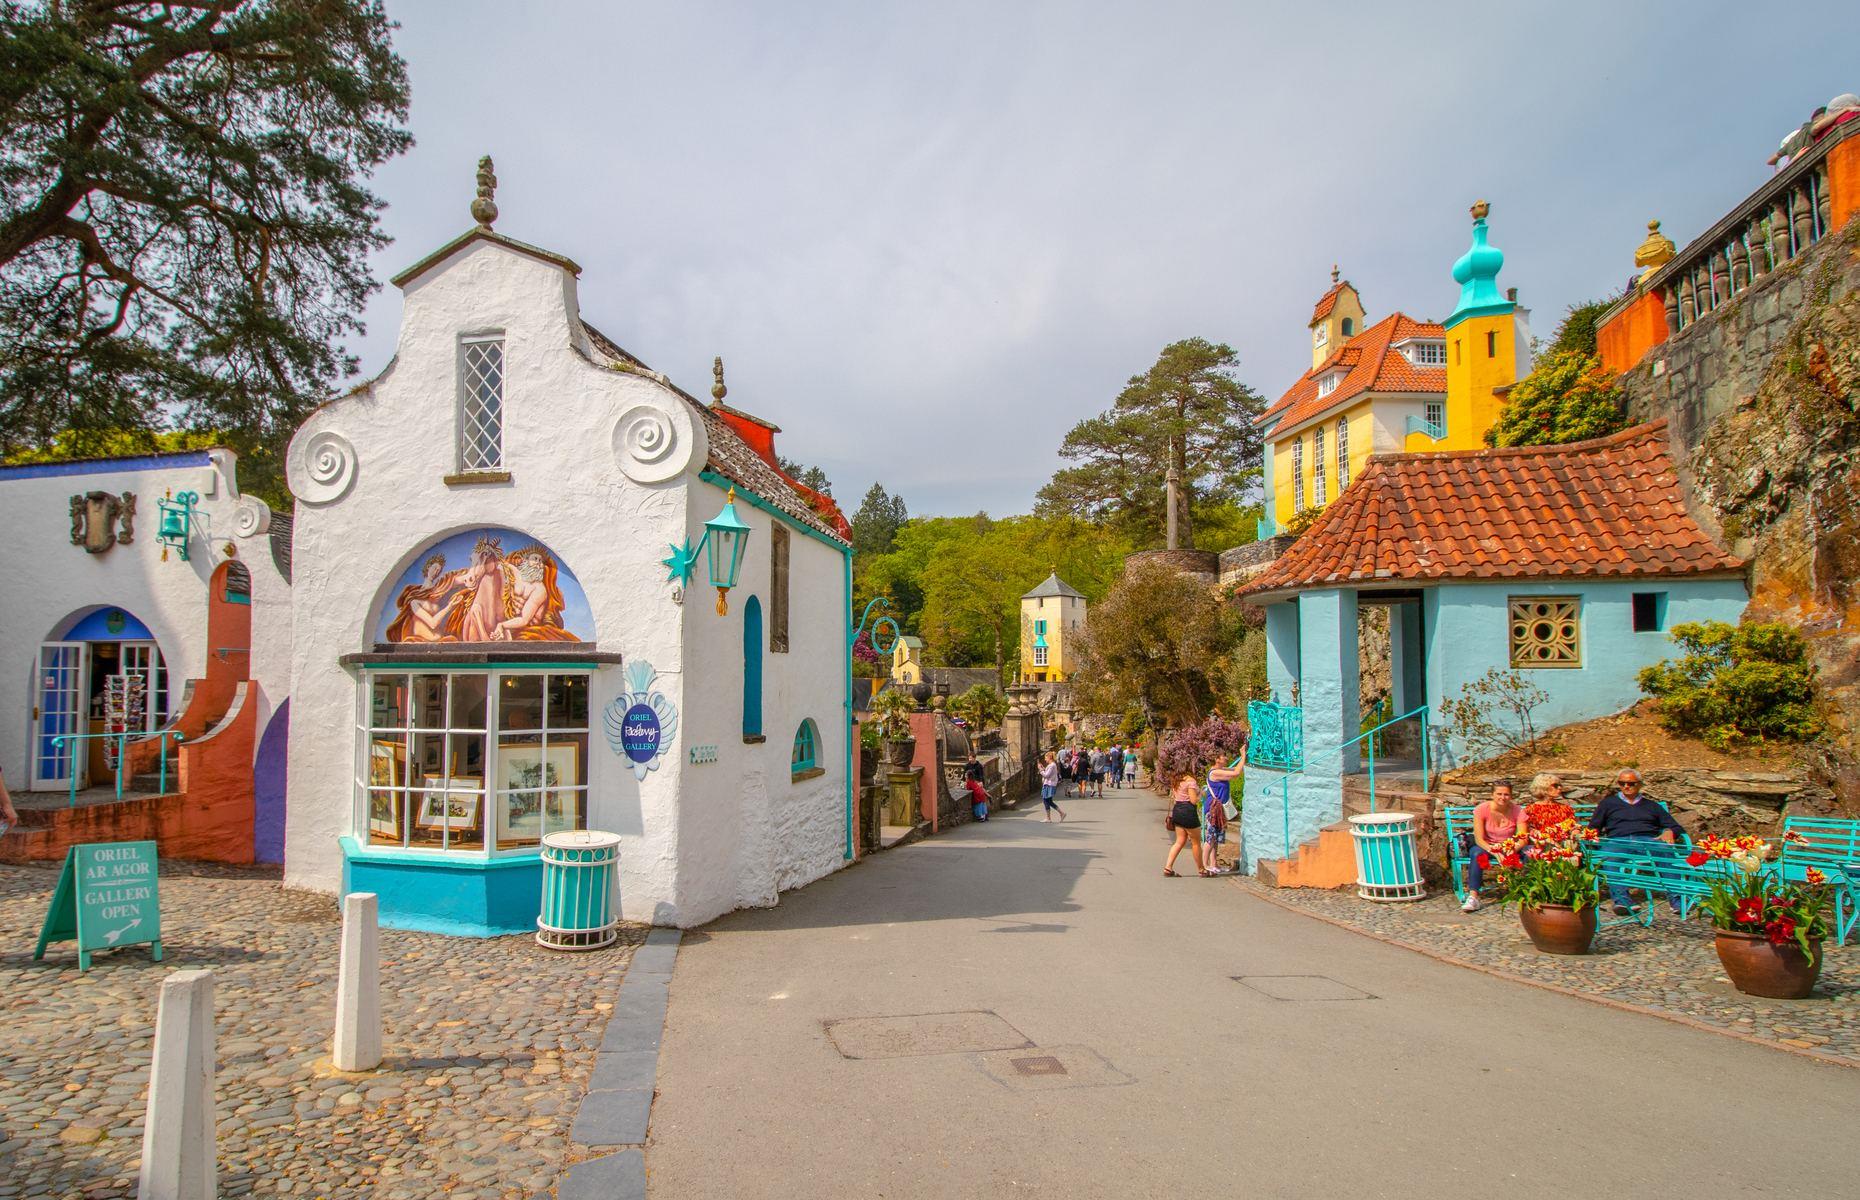 <p>While some villages were built to be functioning communities, <a href="https://www.loveexploring.com/news/68574/portmeirion-village-wales">Portmeirion was created as a fairy-tale folly</a>. Built by the Welsh architect Clough Williams-Ellis between 1925 and 1976 the colorful, Portofino-inspired buildings are gathered among exotic gardens and sandy beaches, punctuated by quaint cafés, restaurants and even an Italian ice cream parlor. The area's steam train still trundles along one of the oldest tracks of its kind.</p>